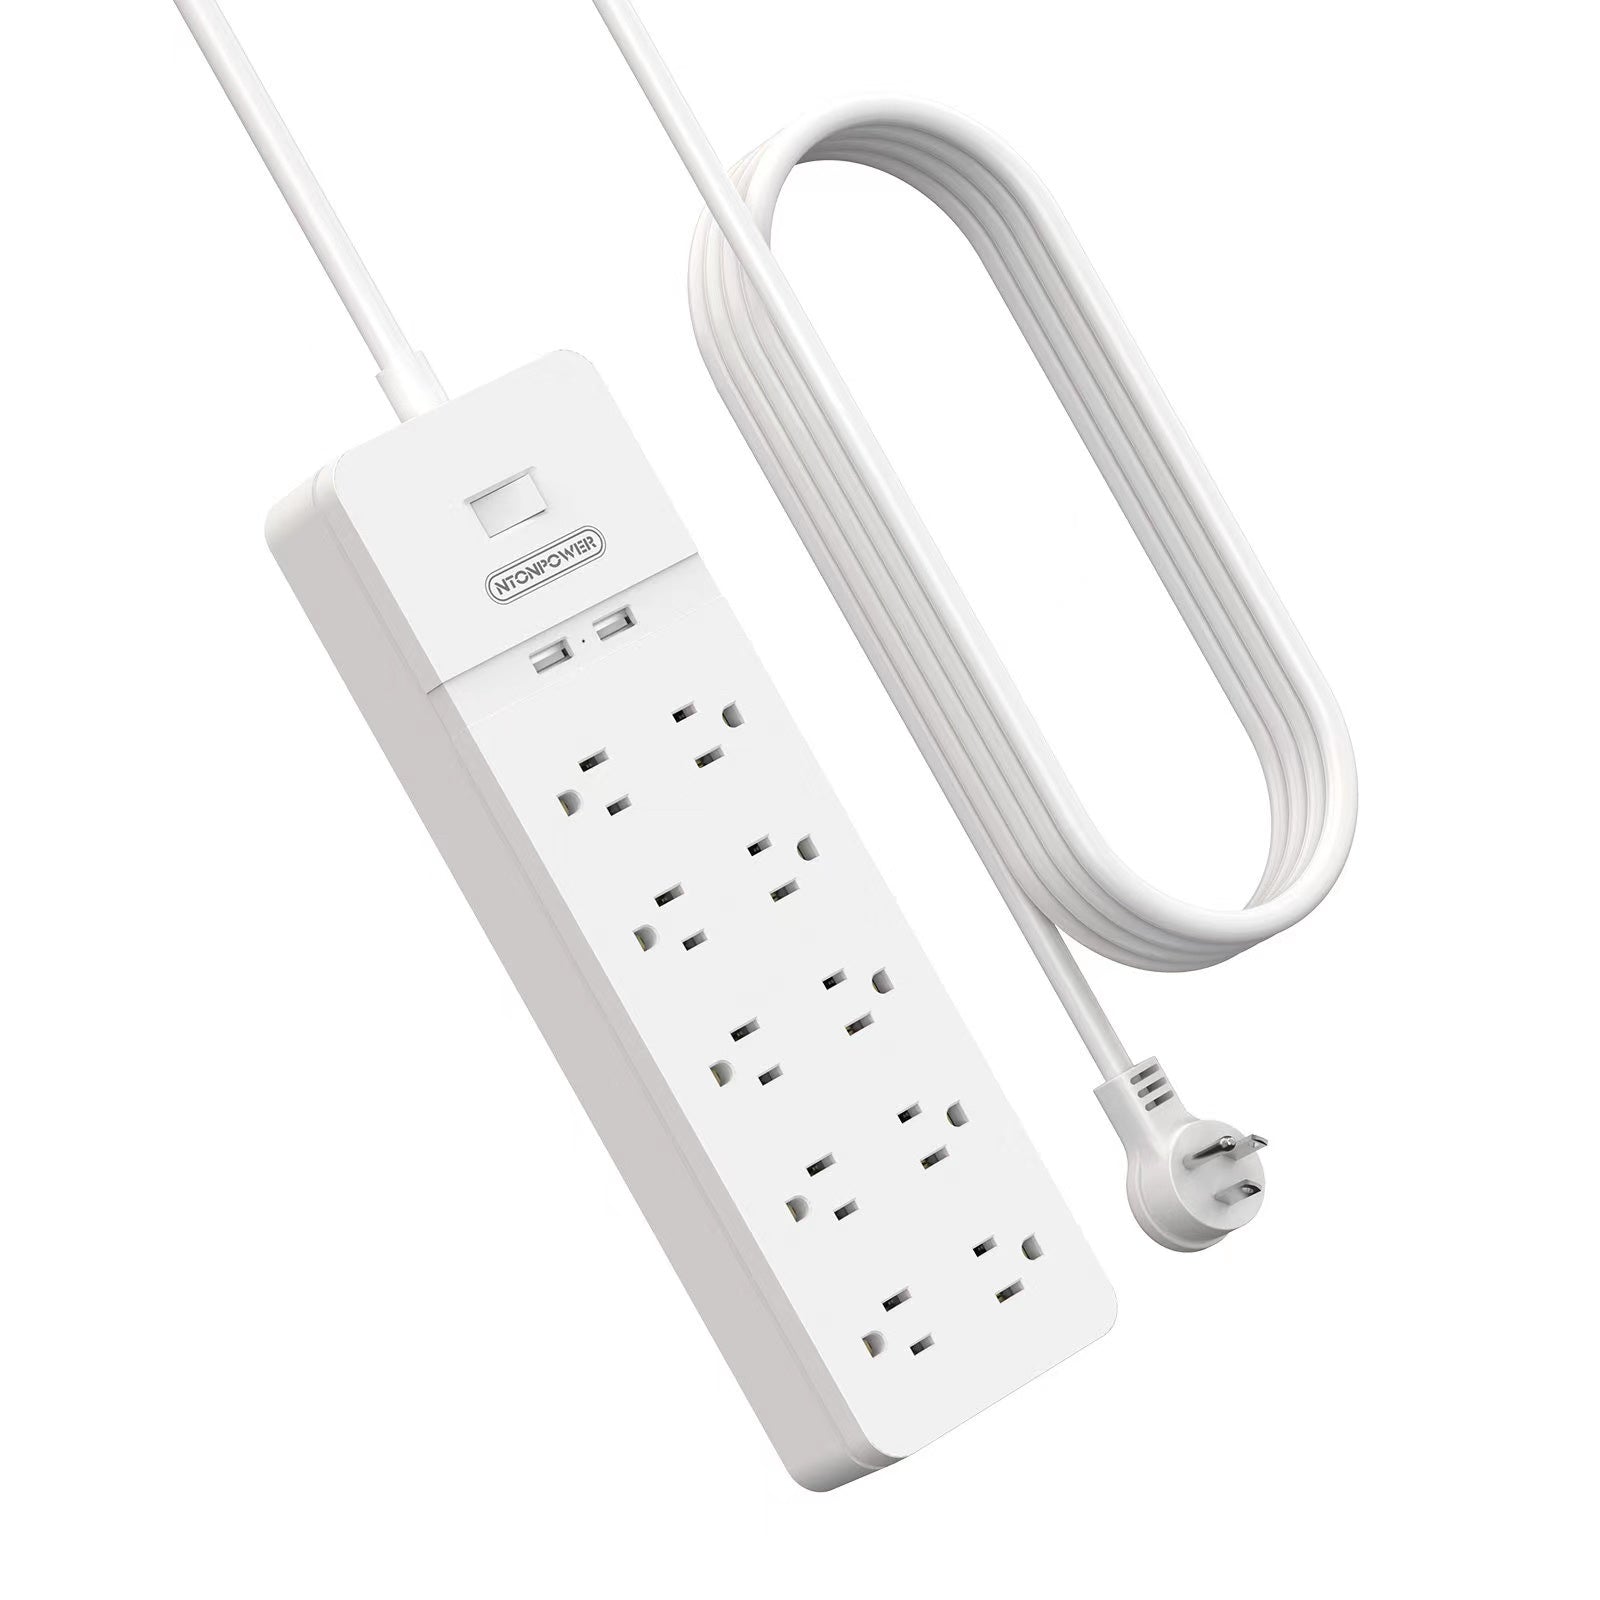 Ntonpower 1080J Surge Protector Power Strip Tower 8 Outlets 5 USB